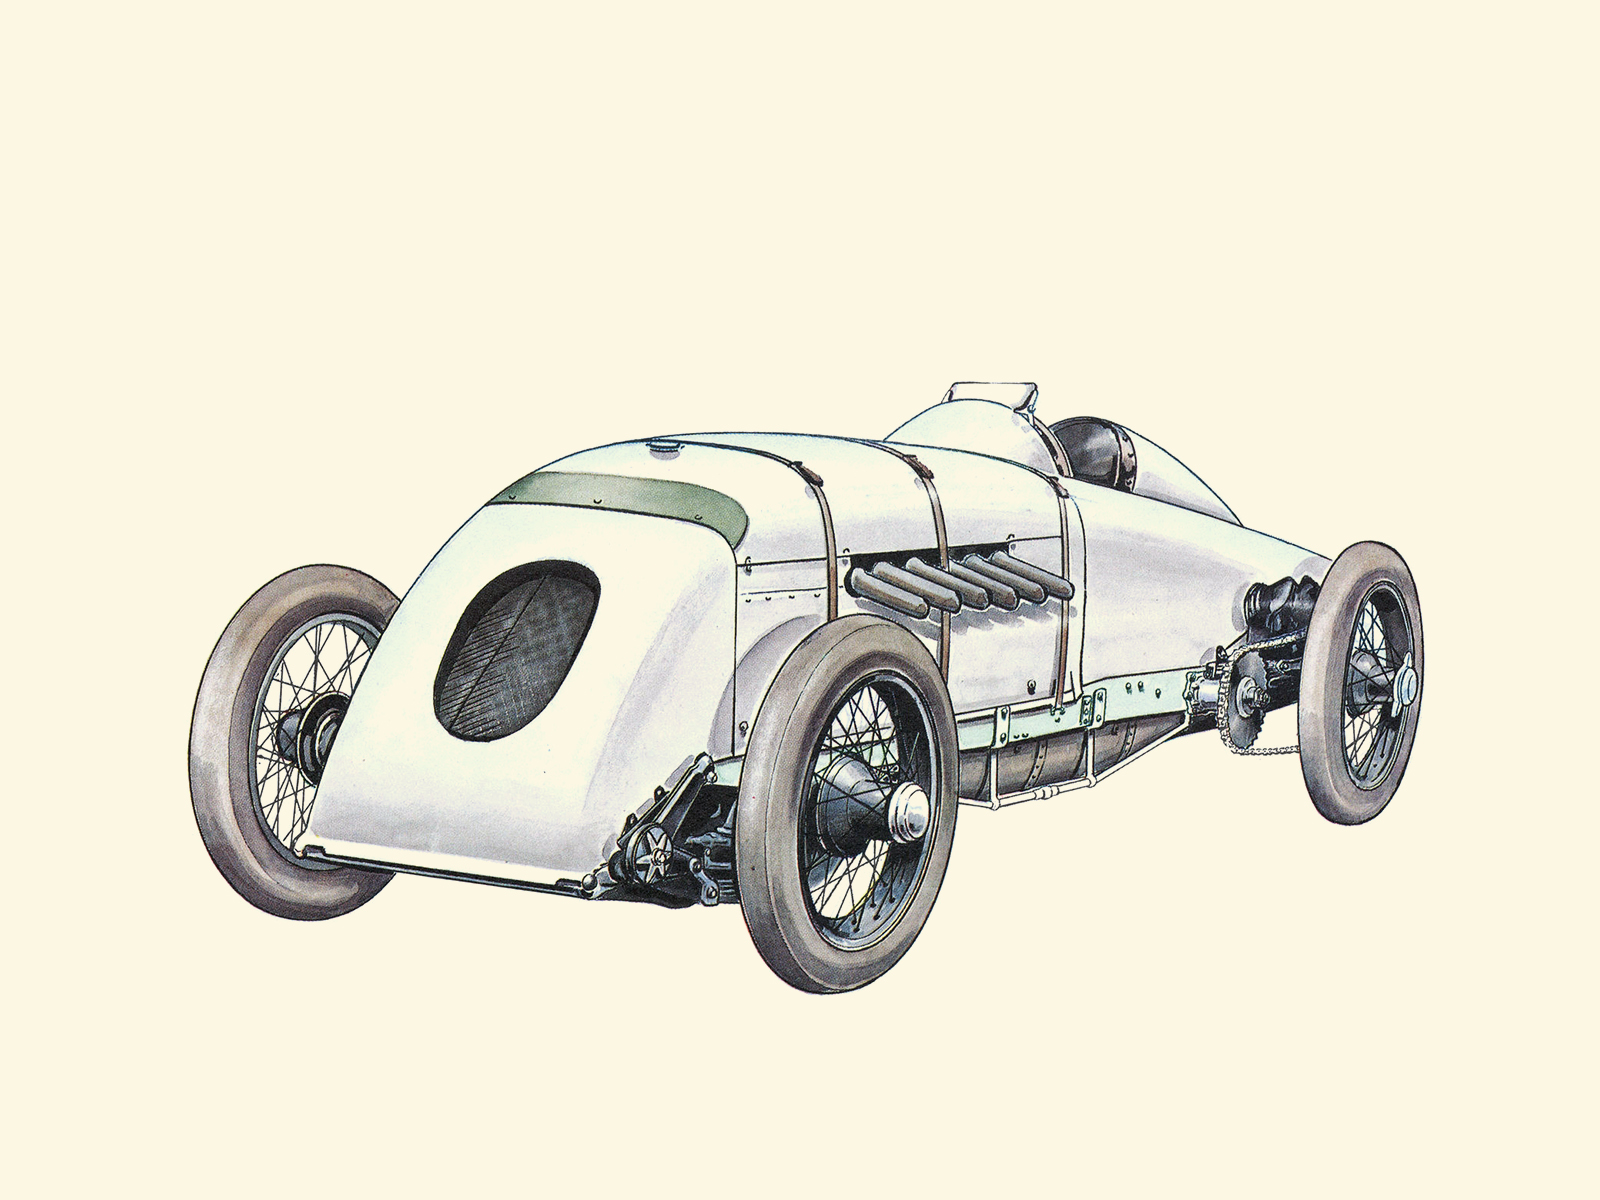 1926 Higham Special (Parry Thomas 169.30/171.02 mph): Illustrated by Piet Olyslager